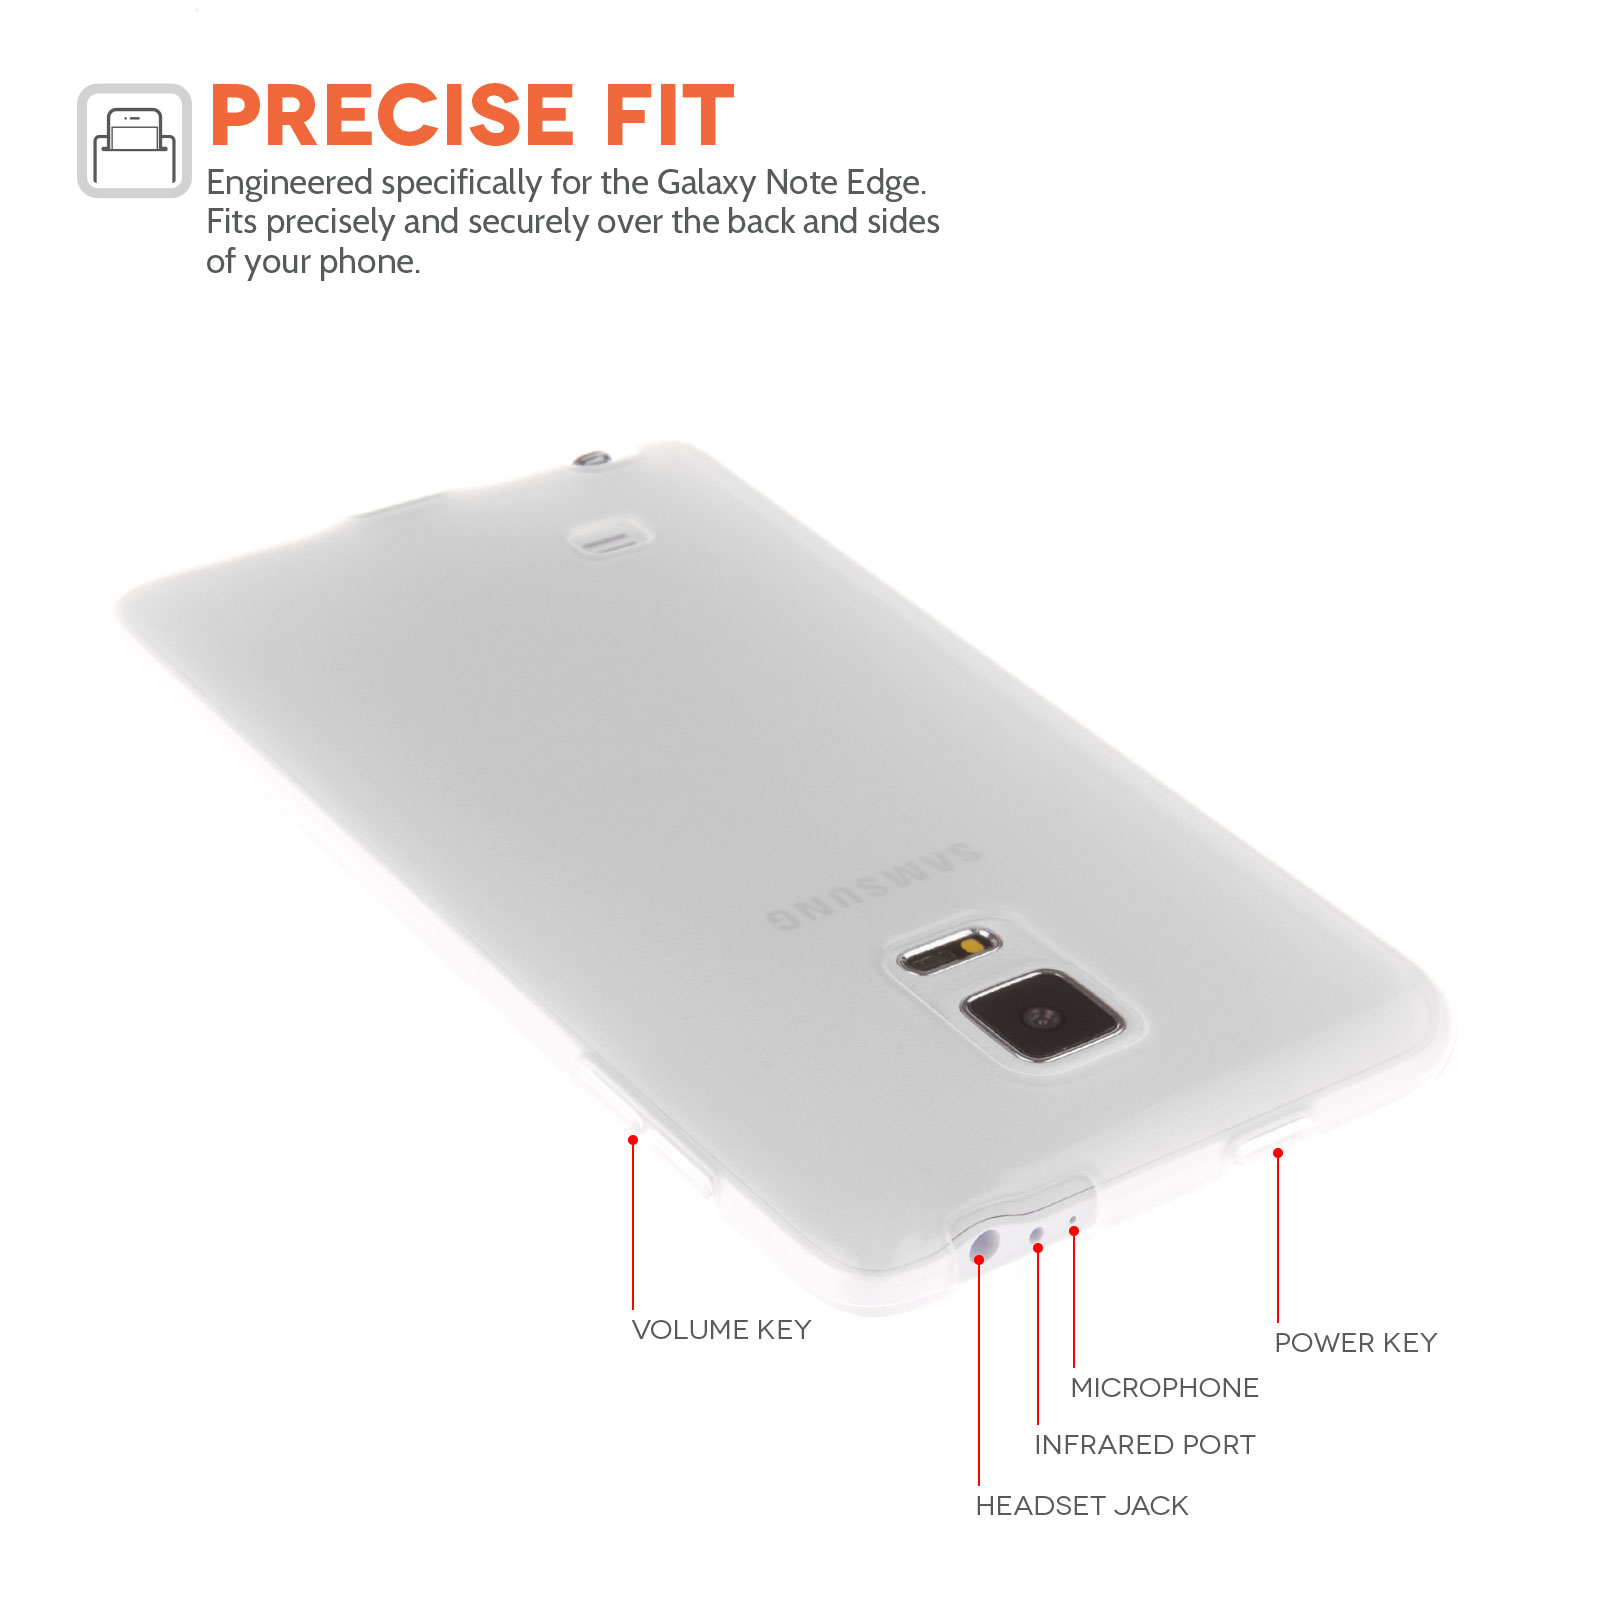 YouSave Accessories Samsung Galaxy Note Edge Silicone Gel Case - Clear